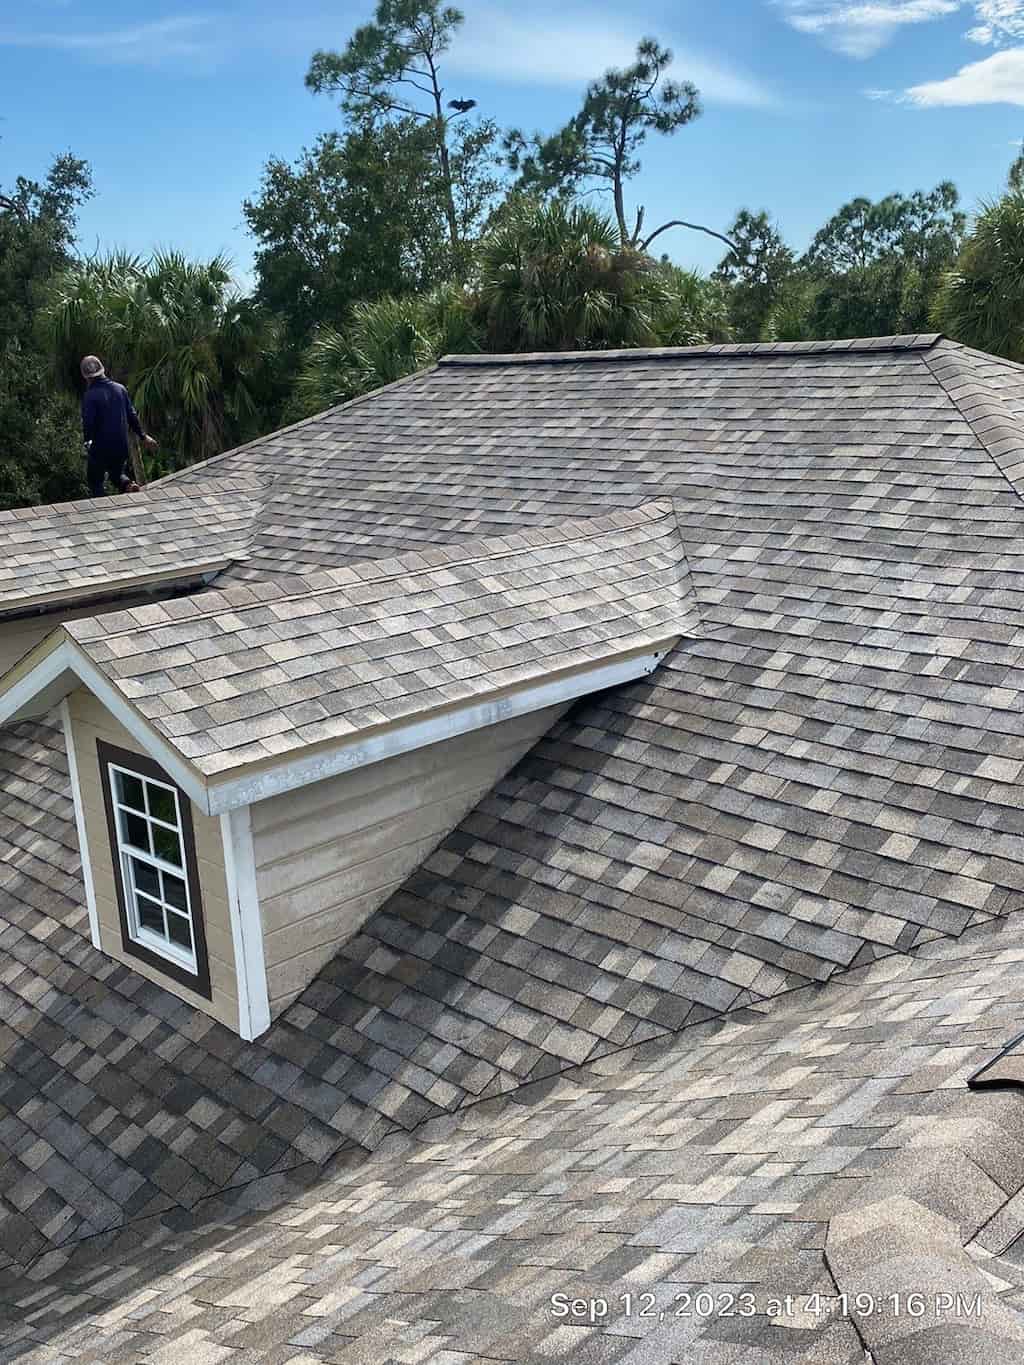 A man is hard at work installing shingles on a roof.